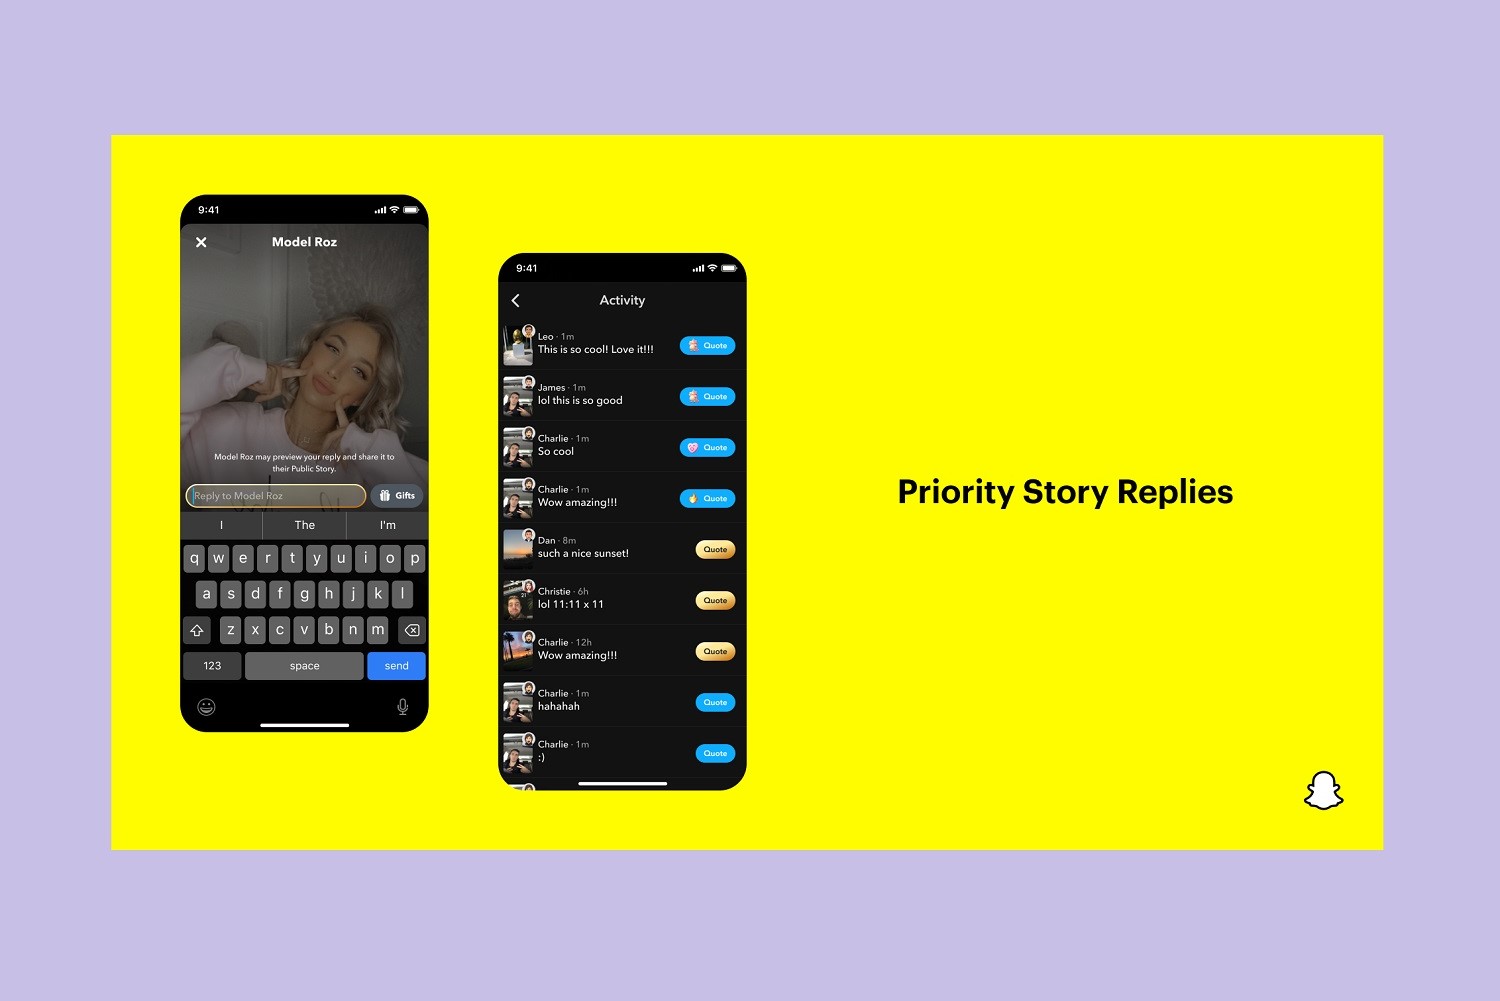 A new Snapchat Plus feature: Priority Story Replies.